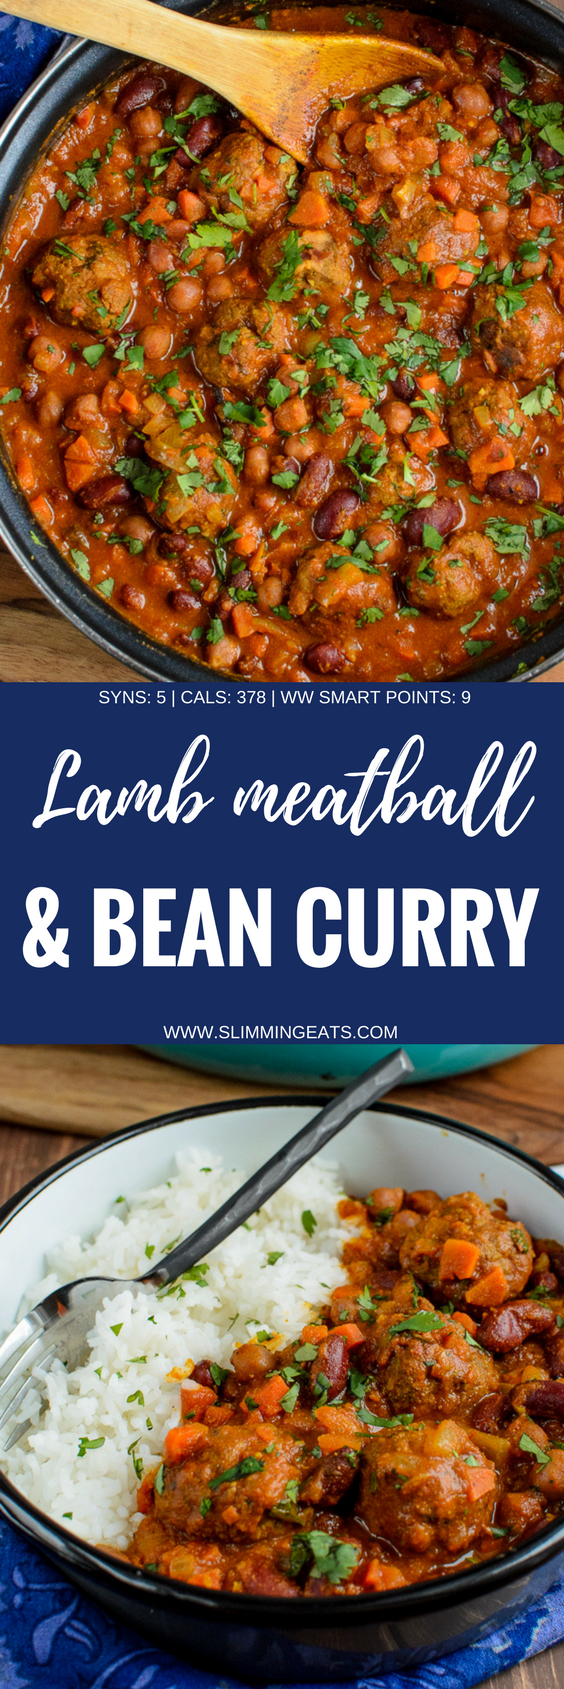 lamb meatballs and bean curry tall pin